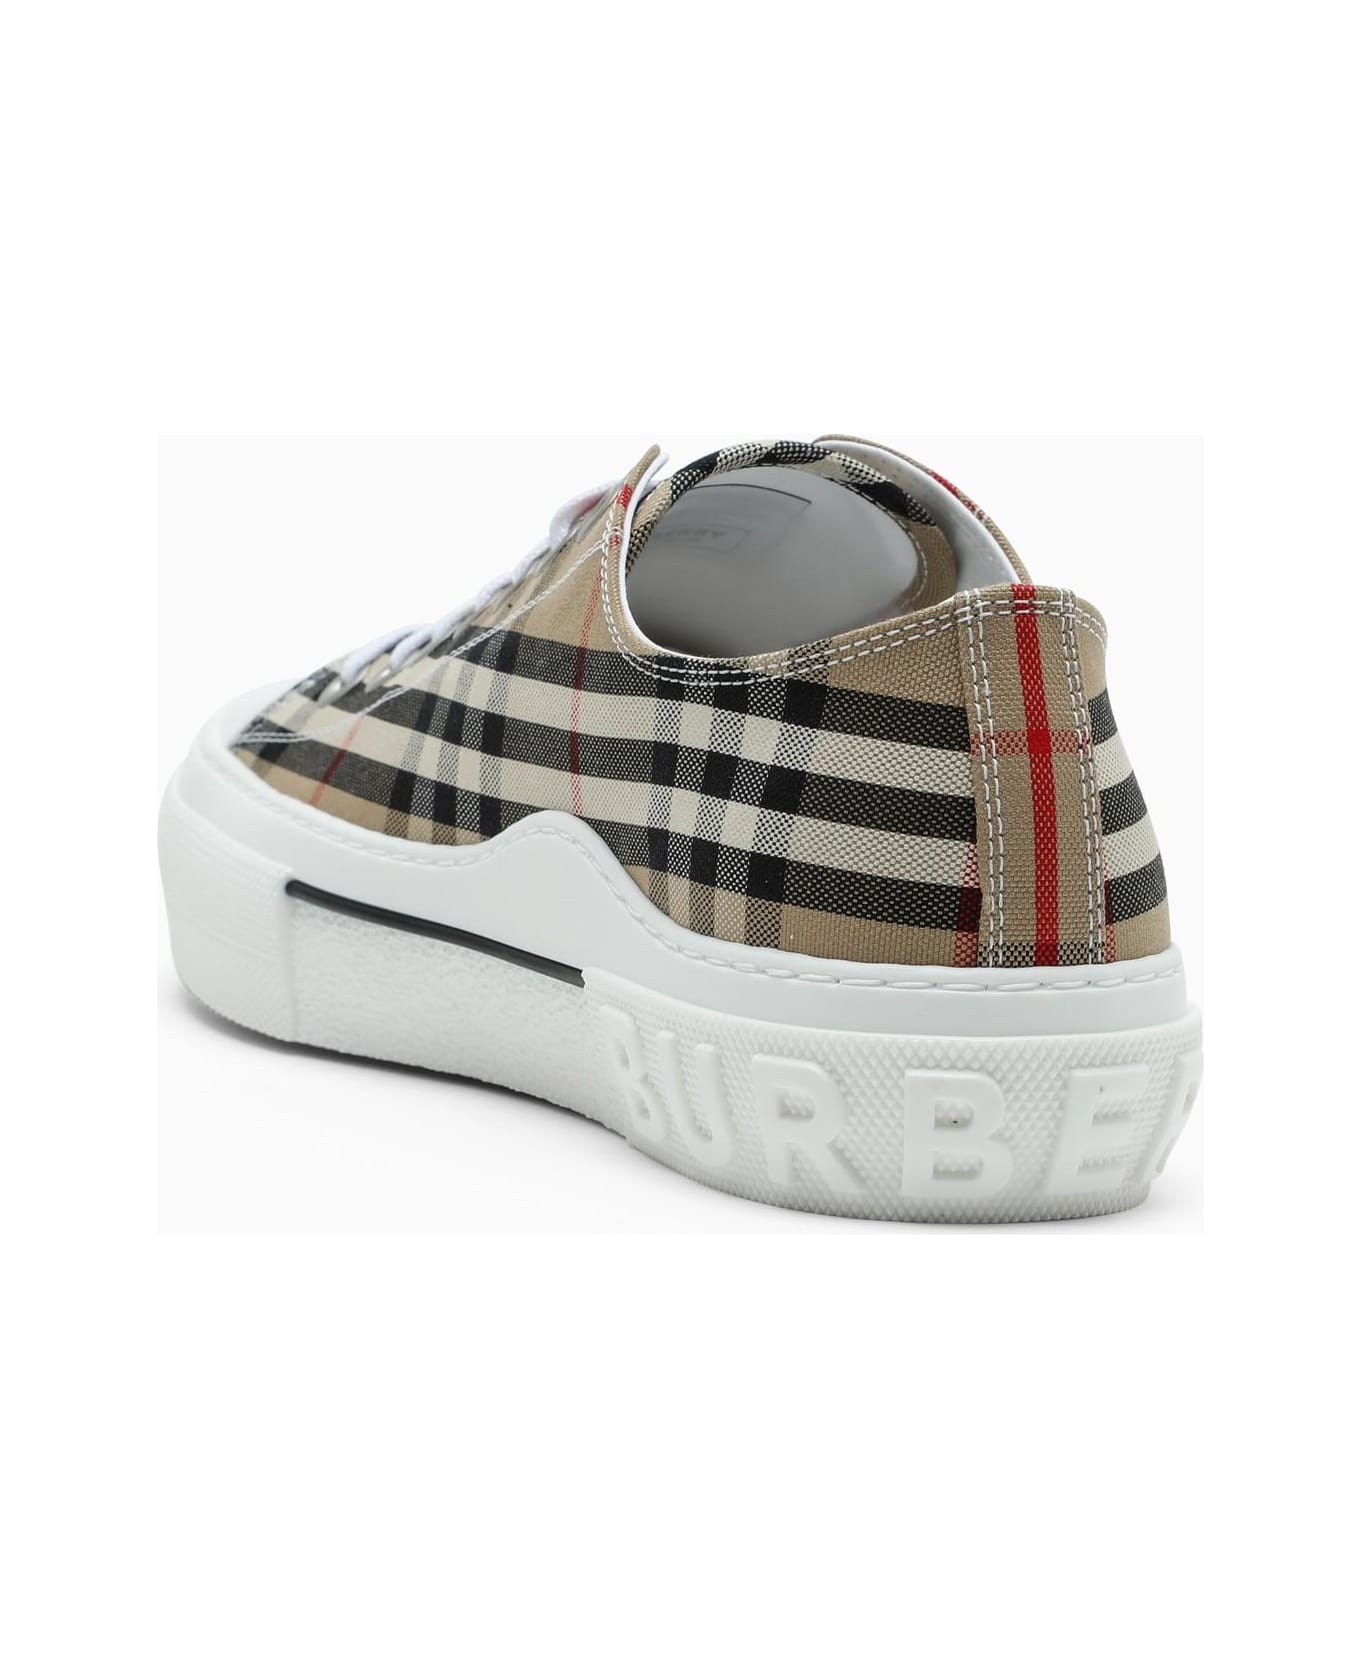 Burberry Beige Sneakers With Vintage Check Motif - NEUTRALS